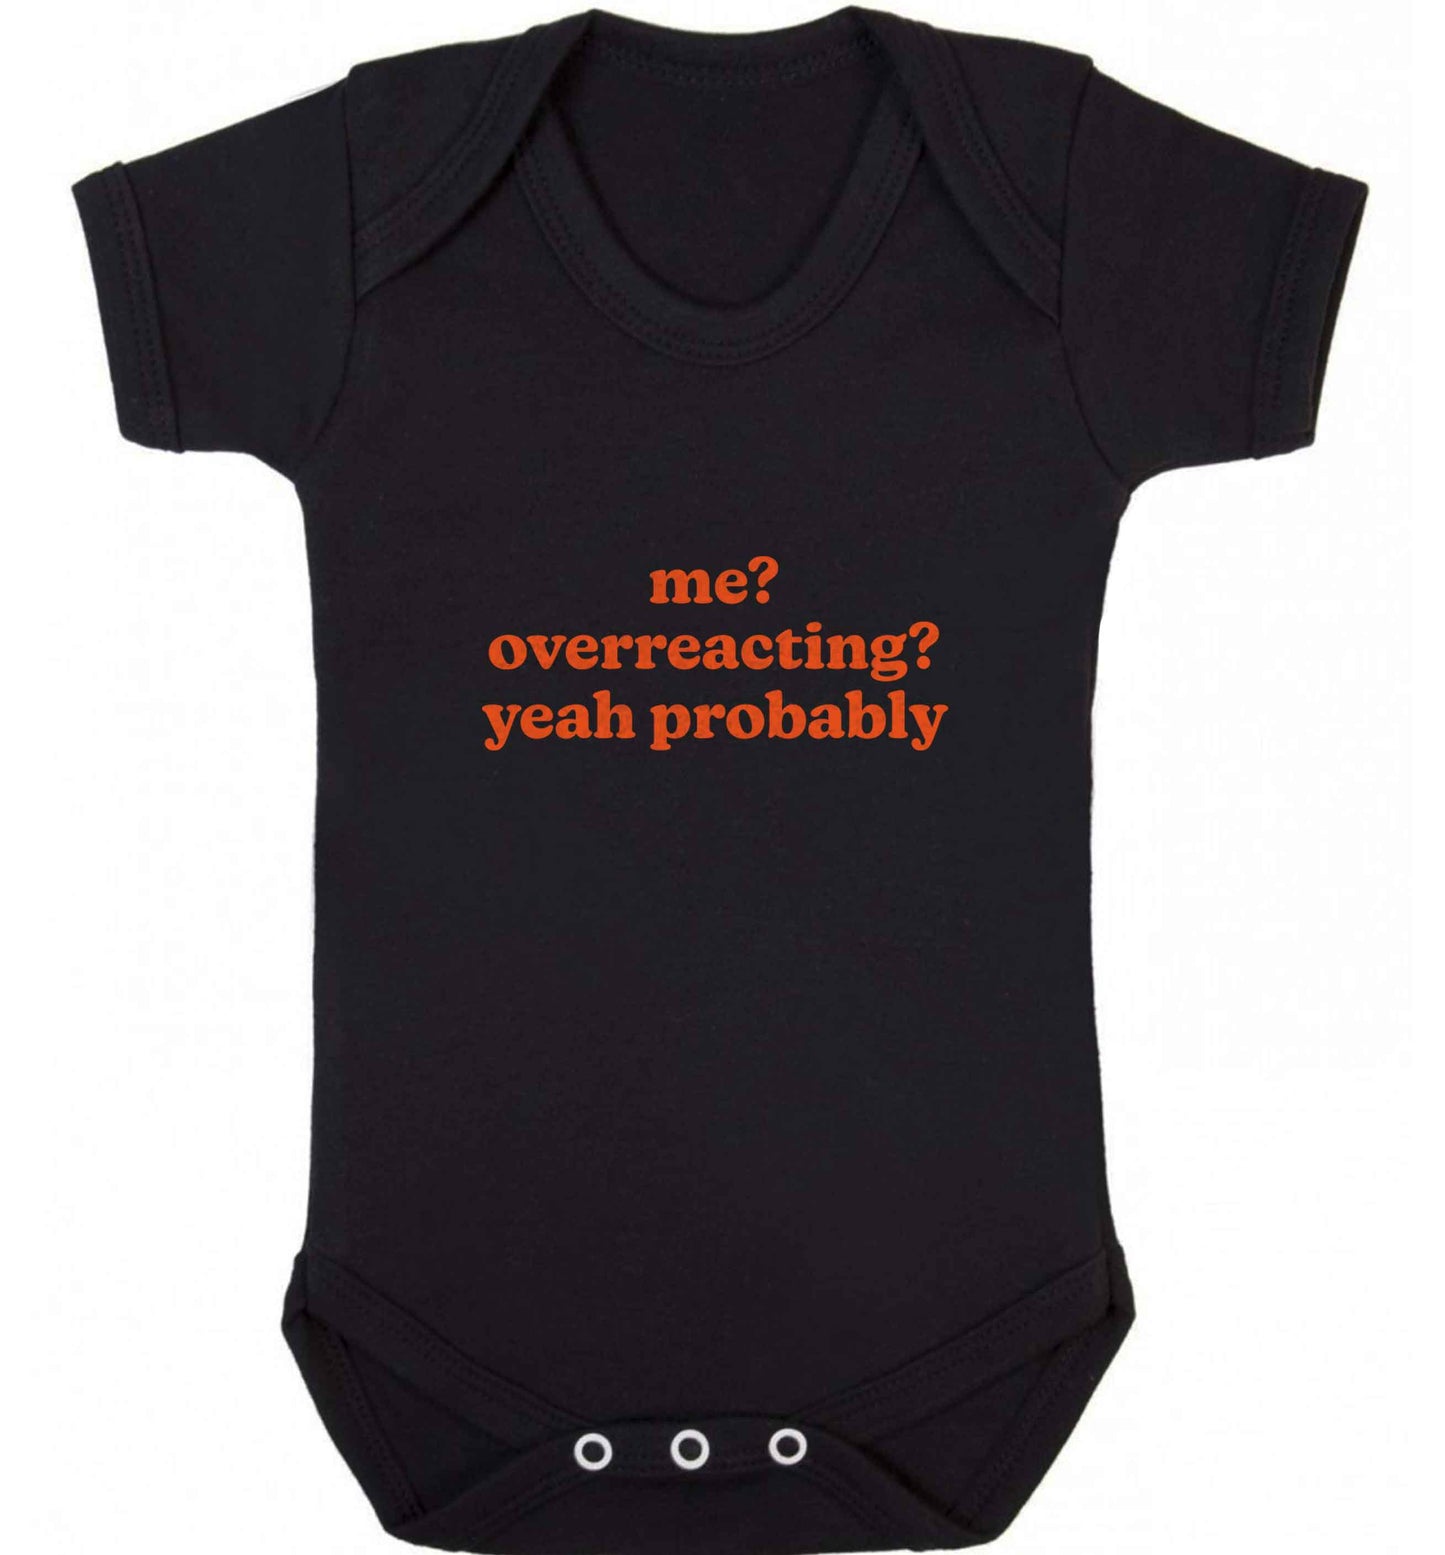 Me? Overreacting? Yeah probably baby vest black 18-24 months